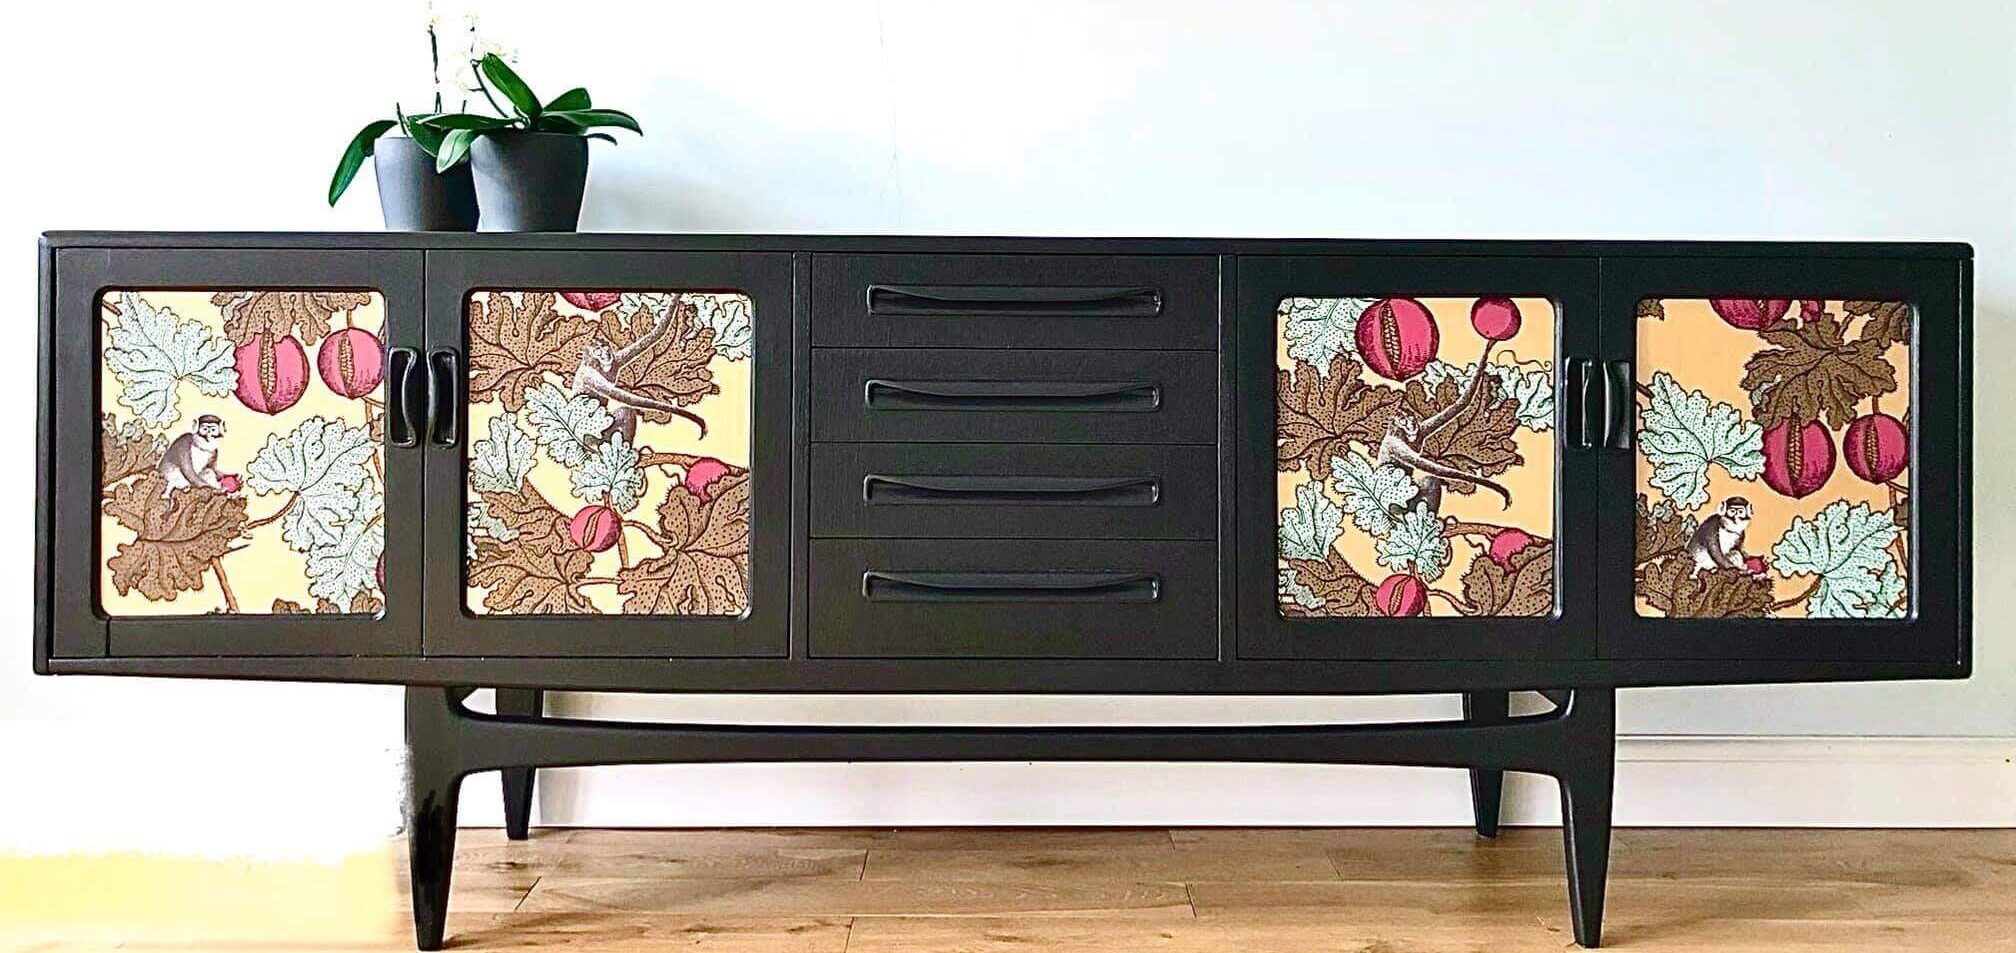 "Up-cyc;led Retro Sideboard" Cole and Son Frutto Proibito wallpaper after picture by Emma Mullender